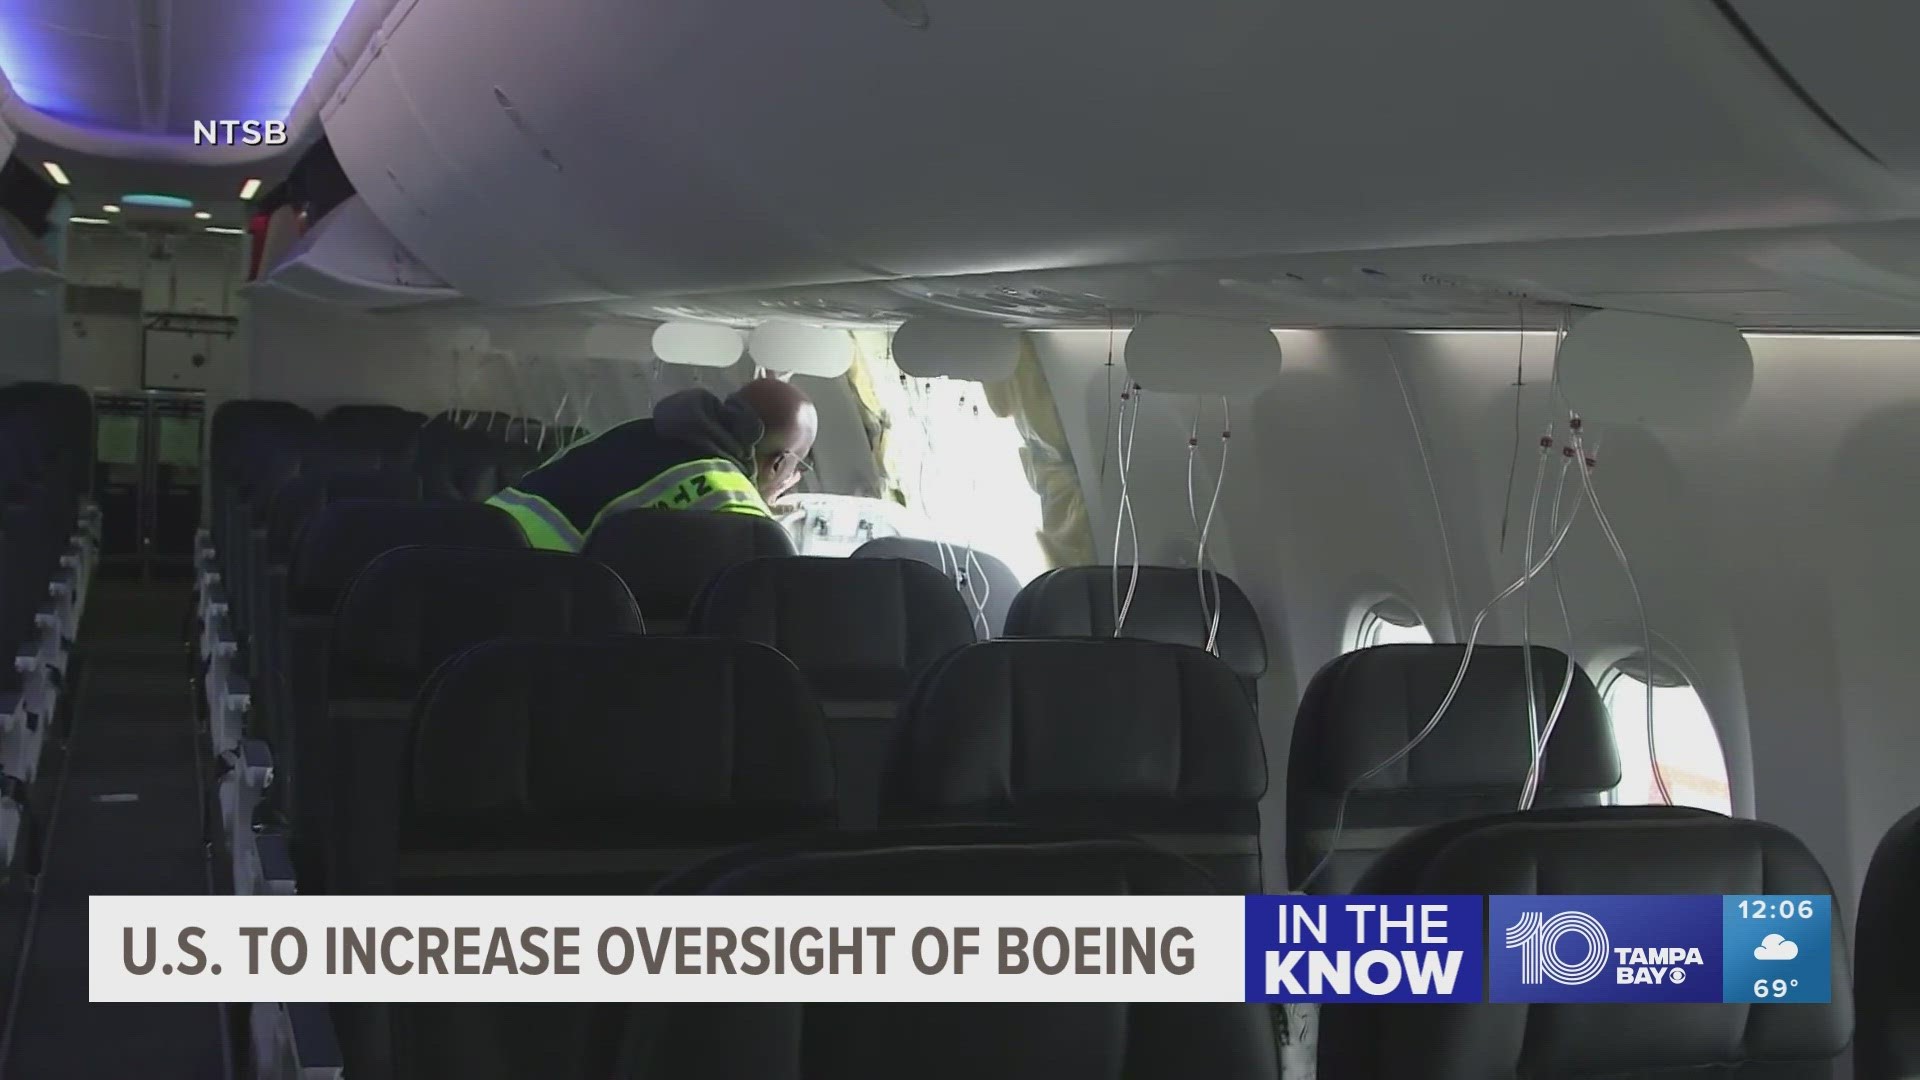 The U.S. will examine Boeing's quality control practices and part suppliers in an increase of oversight. Learn more about this and other national stories.